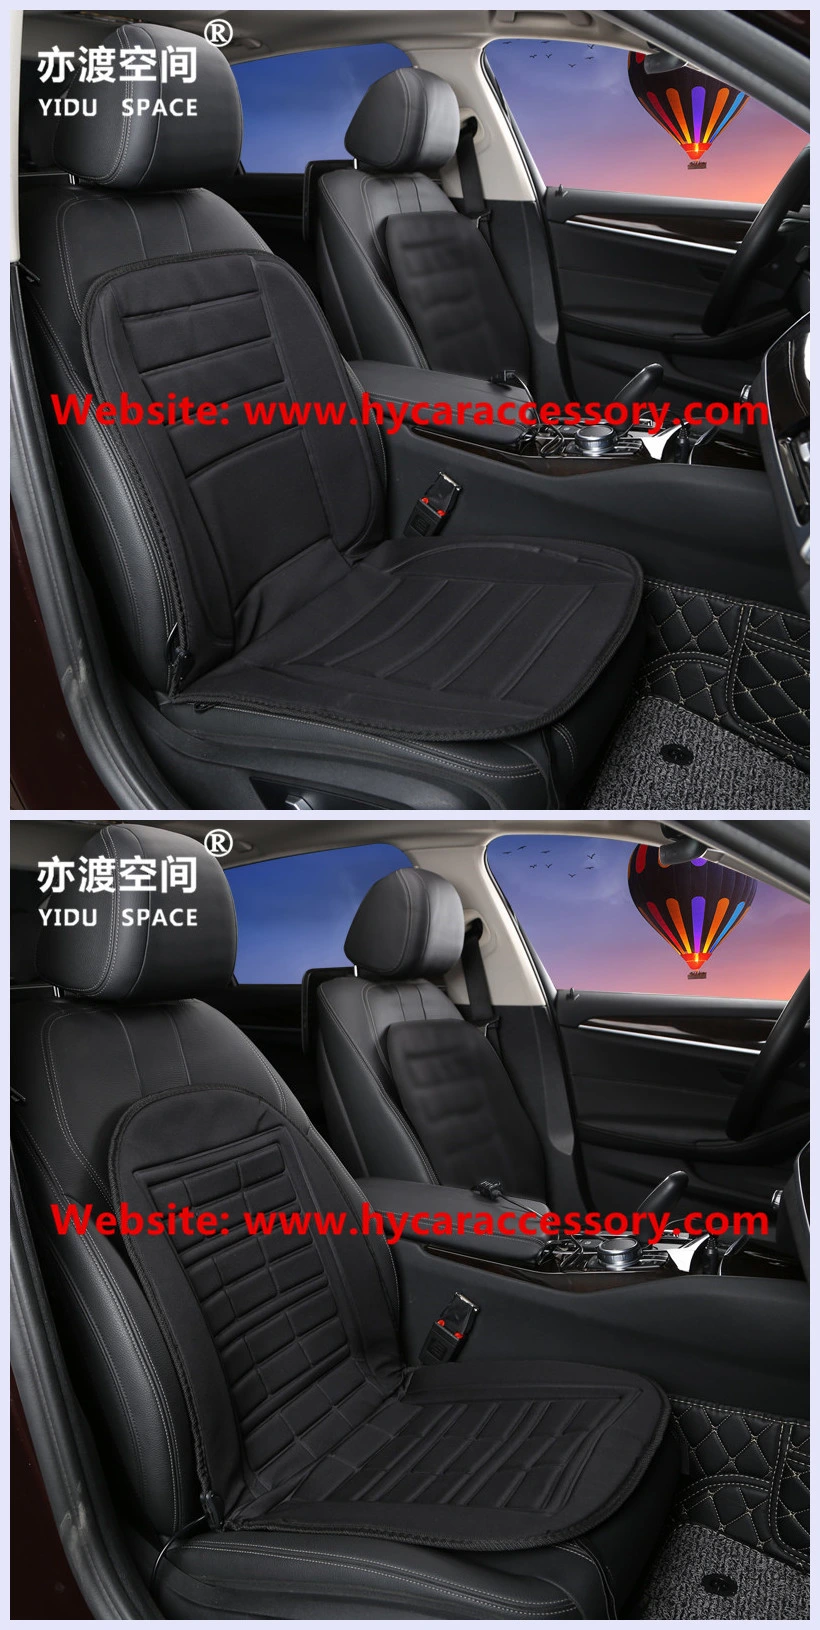 Cigarette Lighter Universal Car Seat Back Cushion for Cold Weather